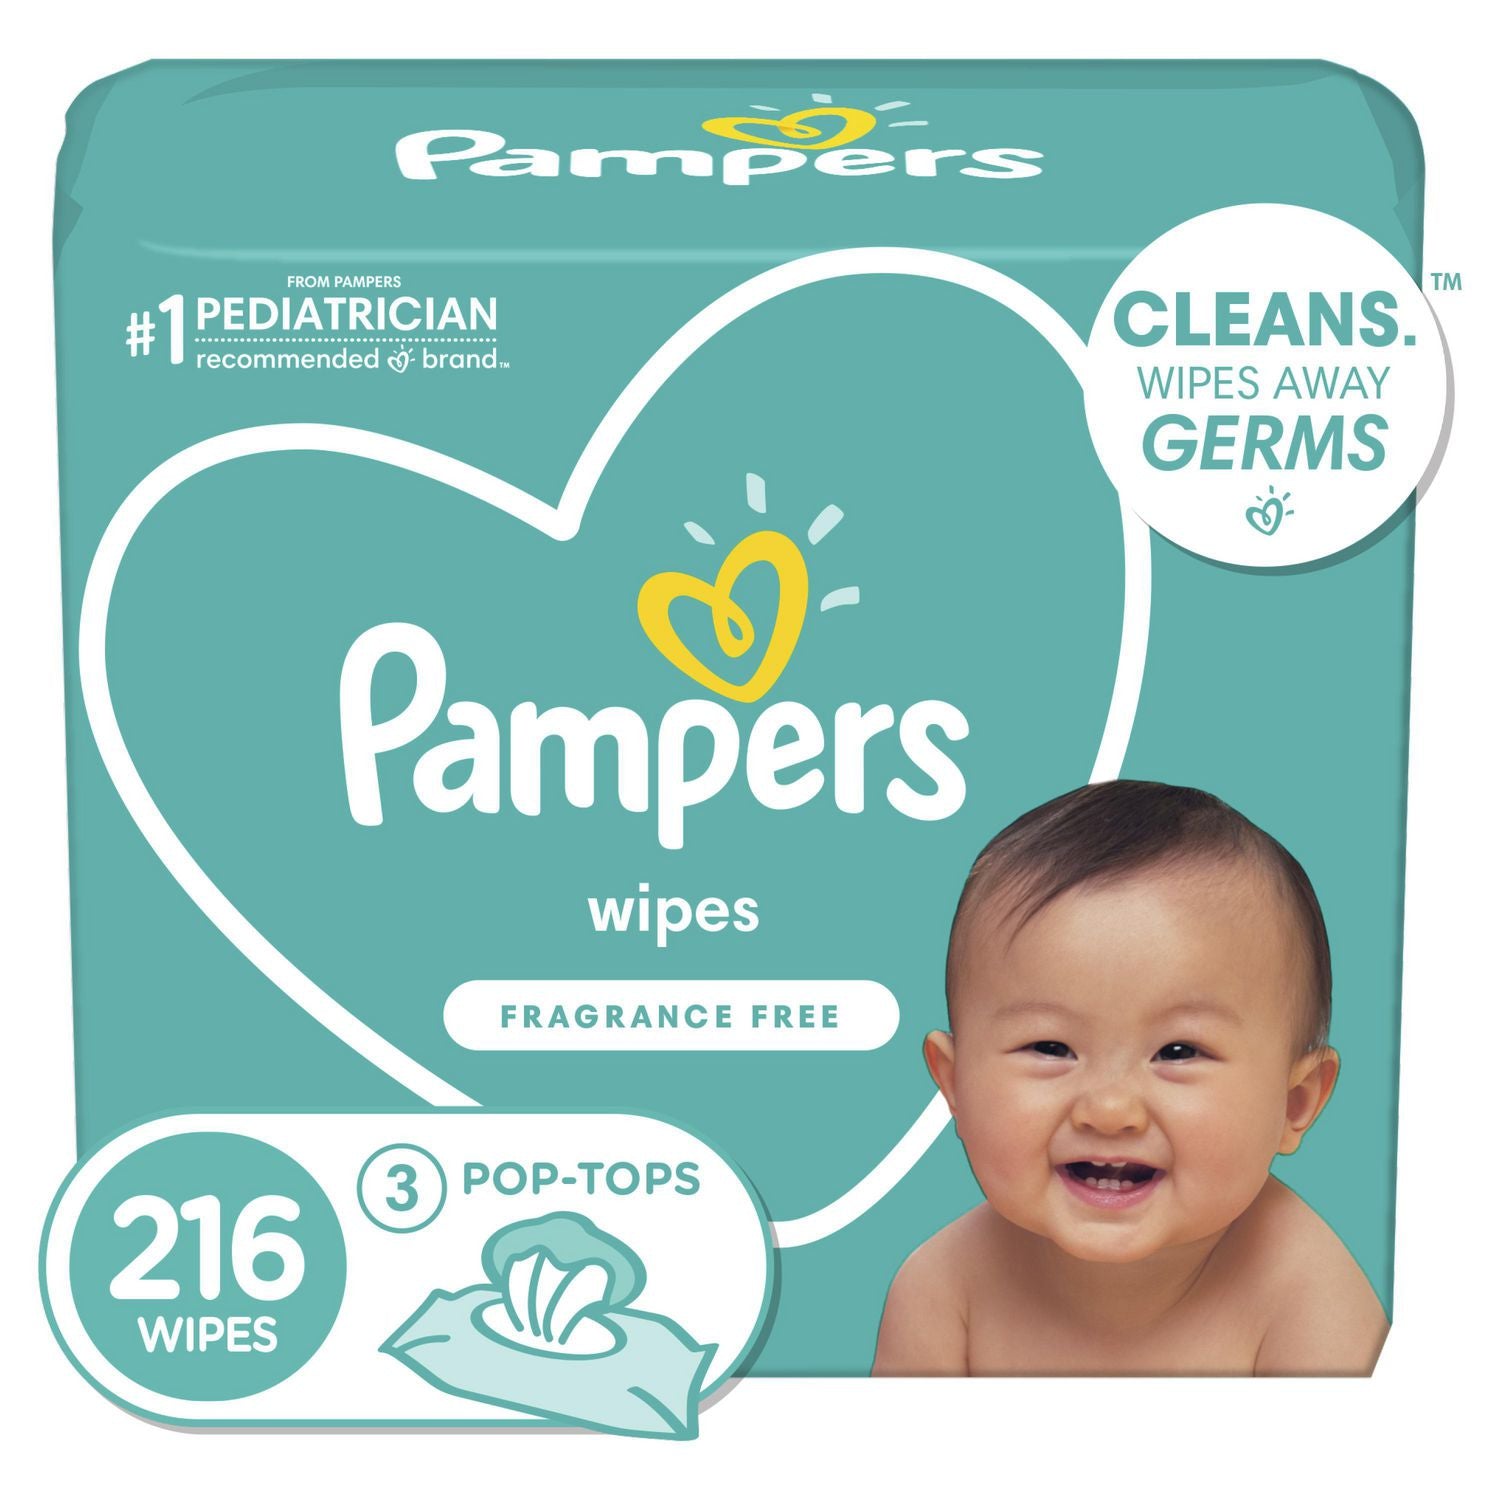 Pampers Baby Wipes Fragrance Free - 3 pop-tops (216 wipes total)